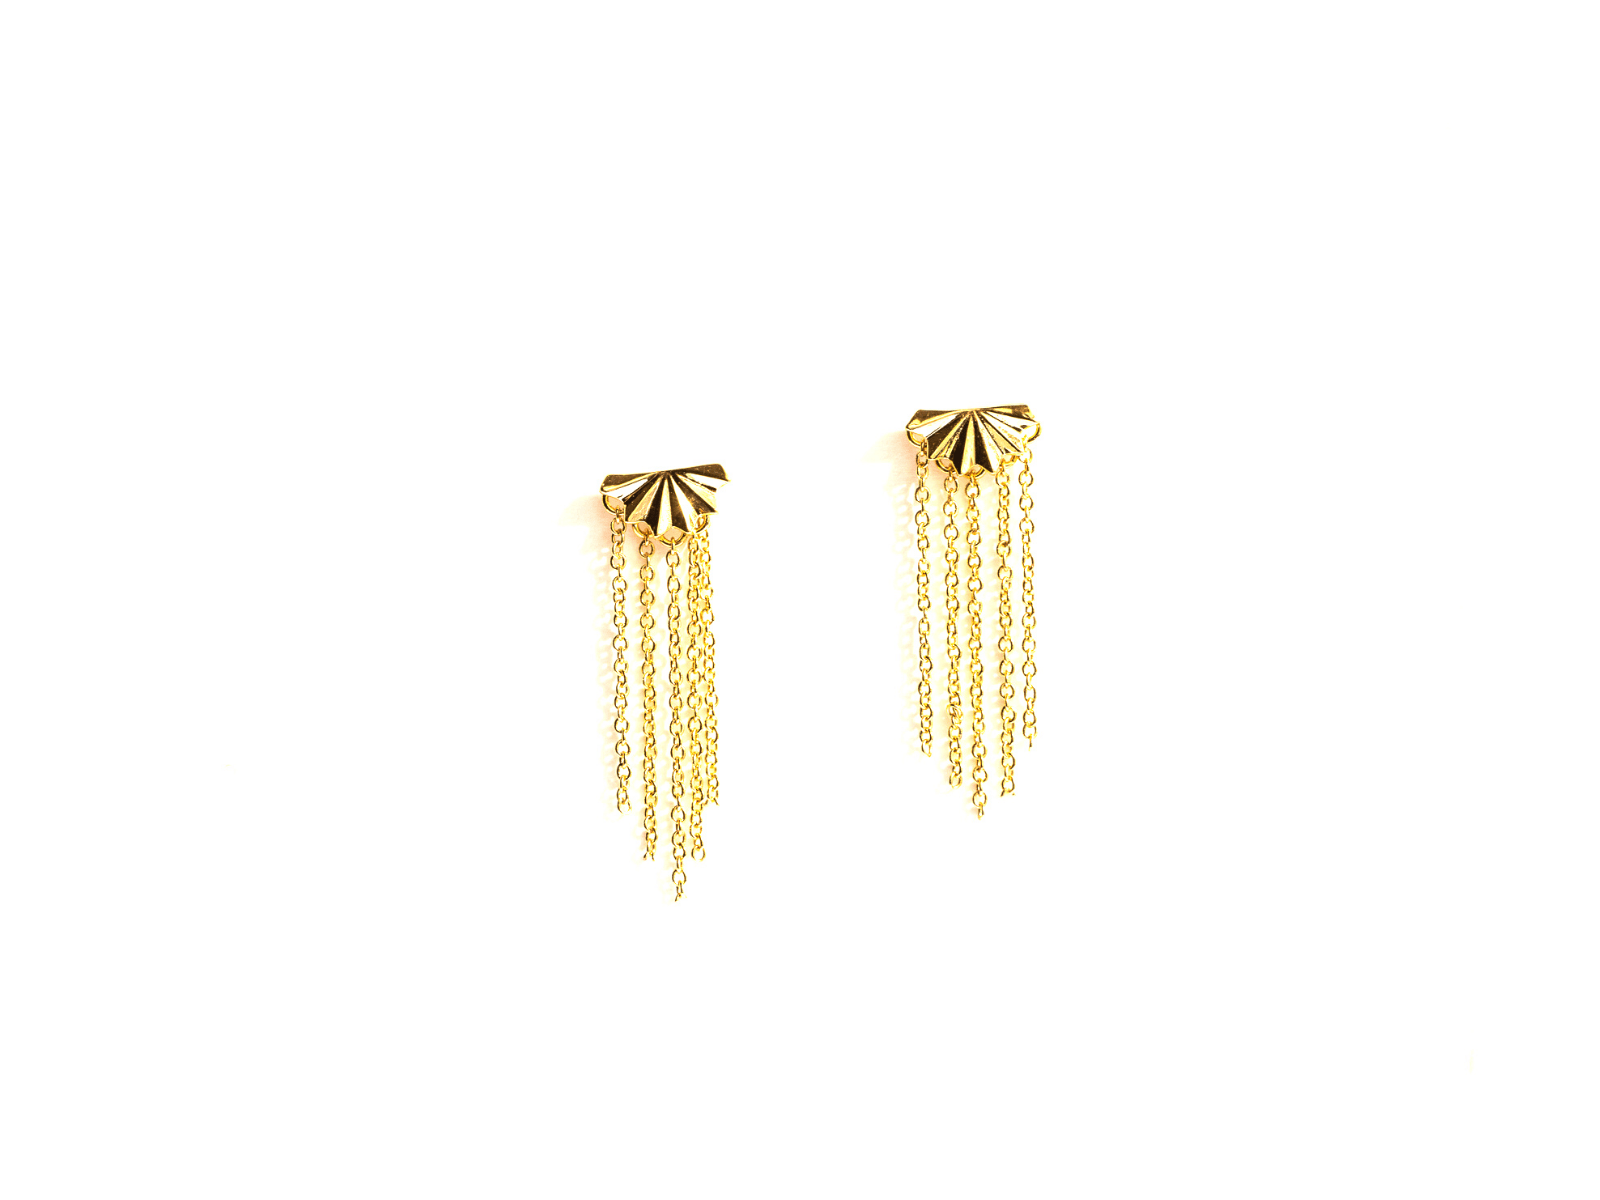 Starburst Earring with Fringe - Goldenerre Women's Apple Watch Bands and Jewelry